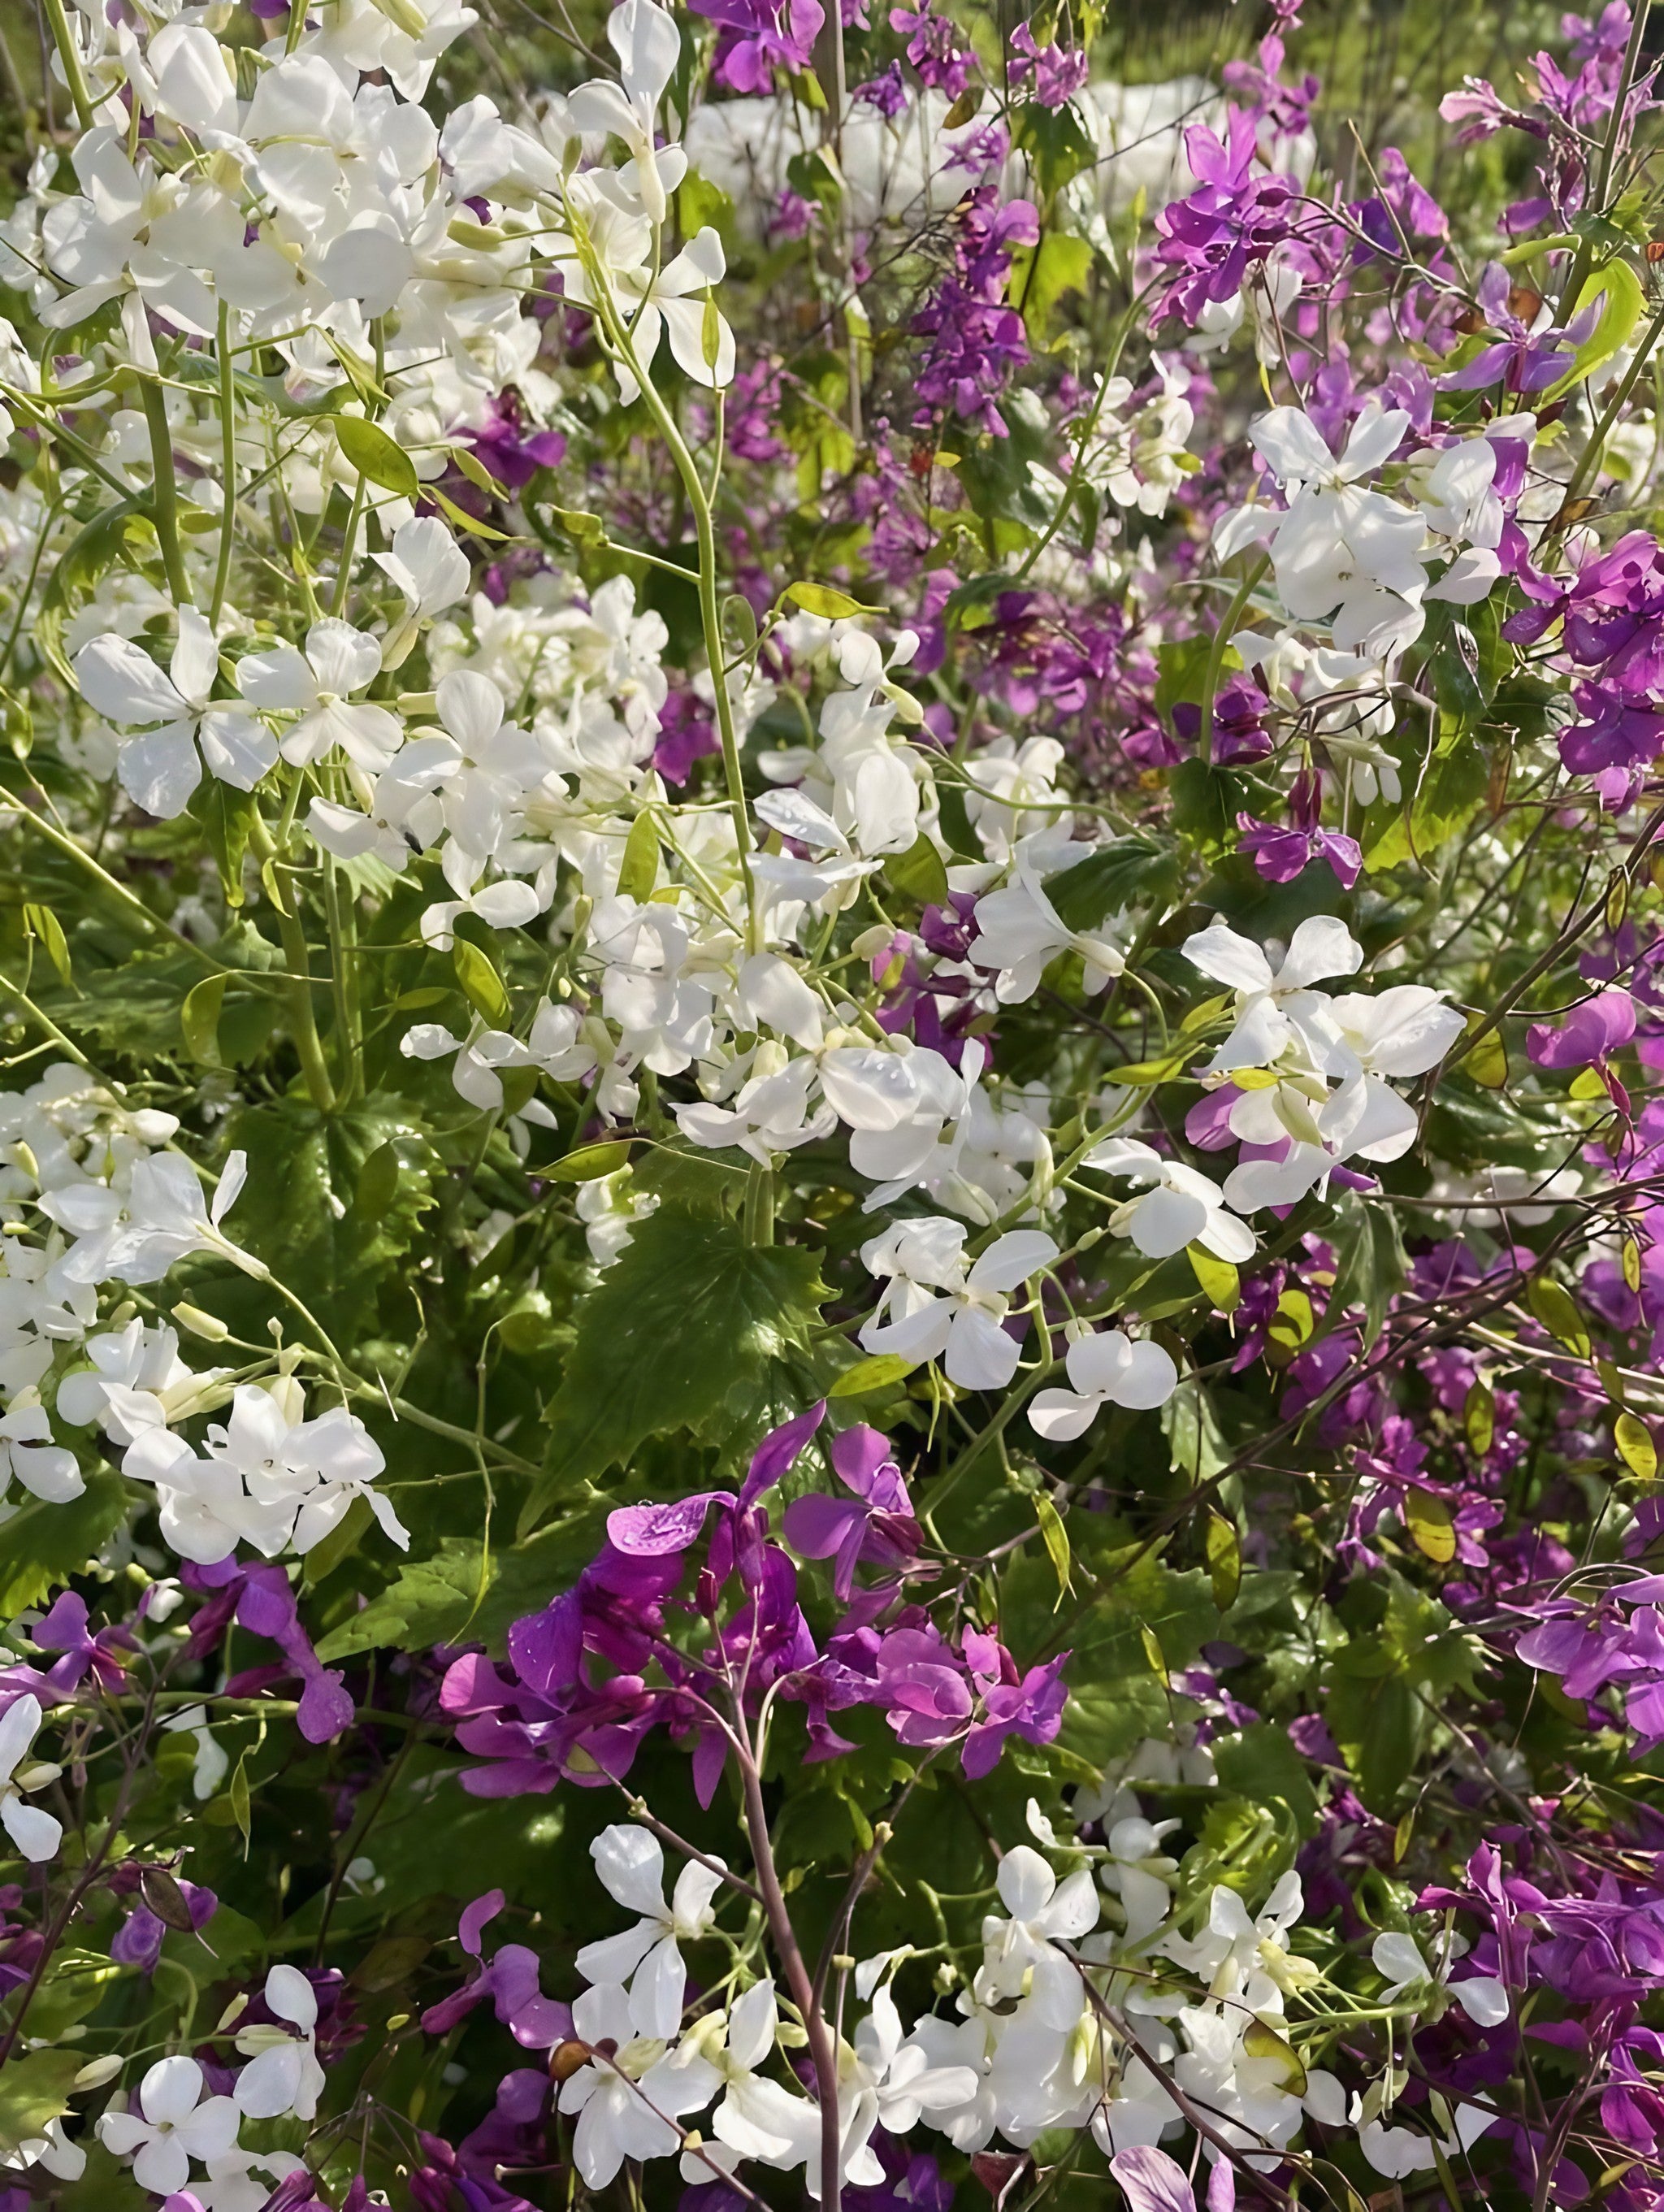 A dense cluster of Honesty flowers showcasing their distinctive purple and white hues